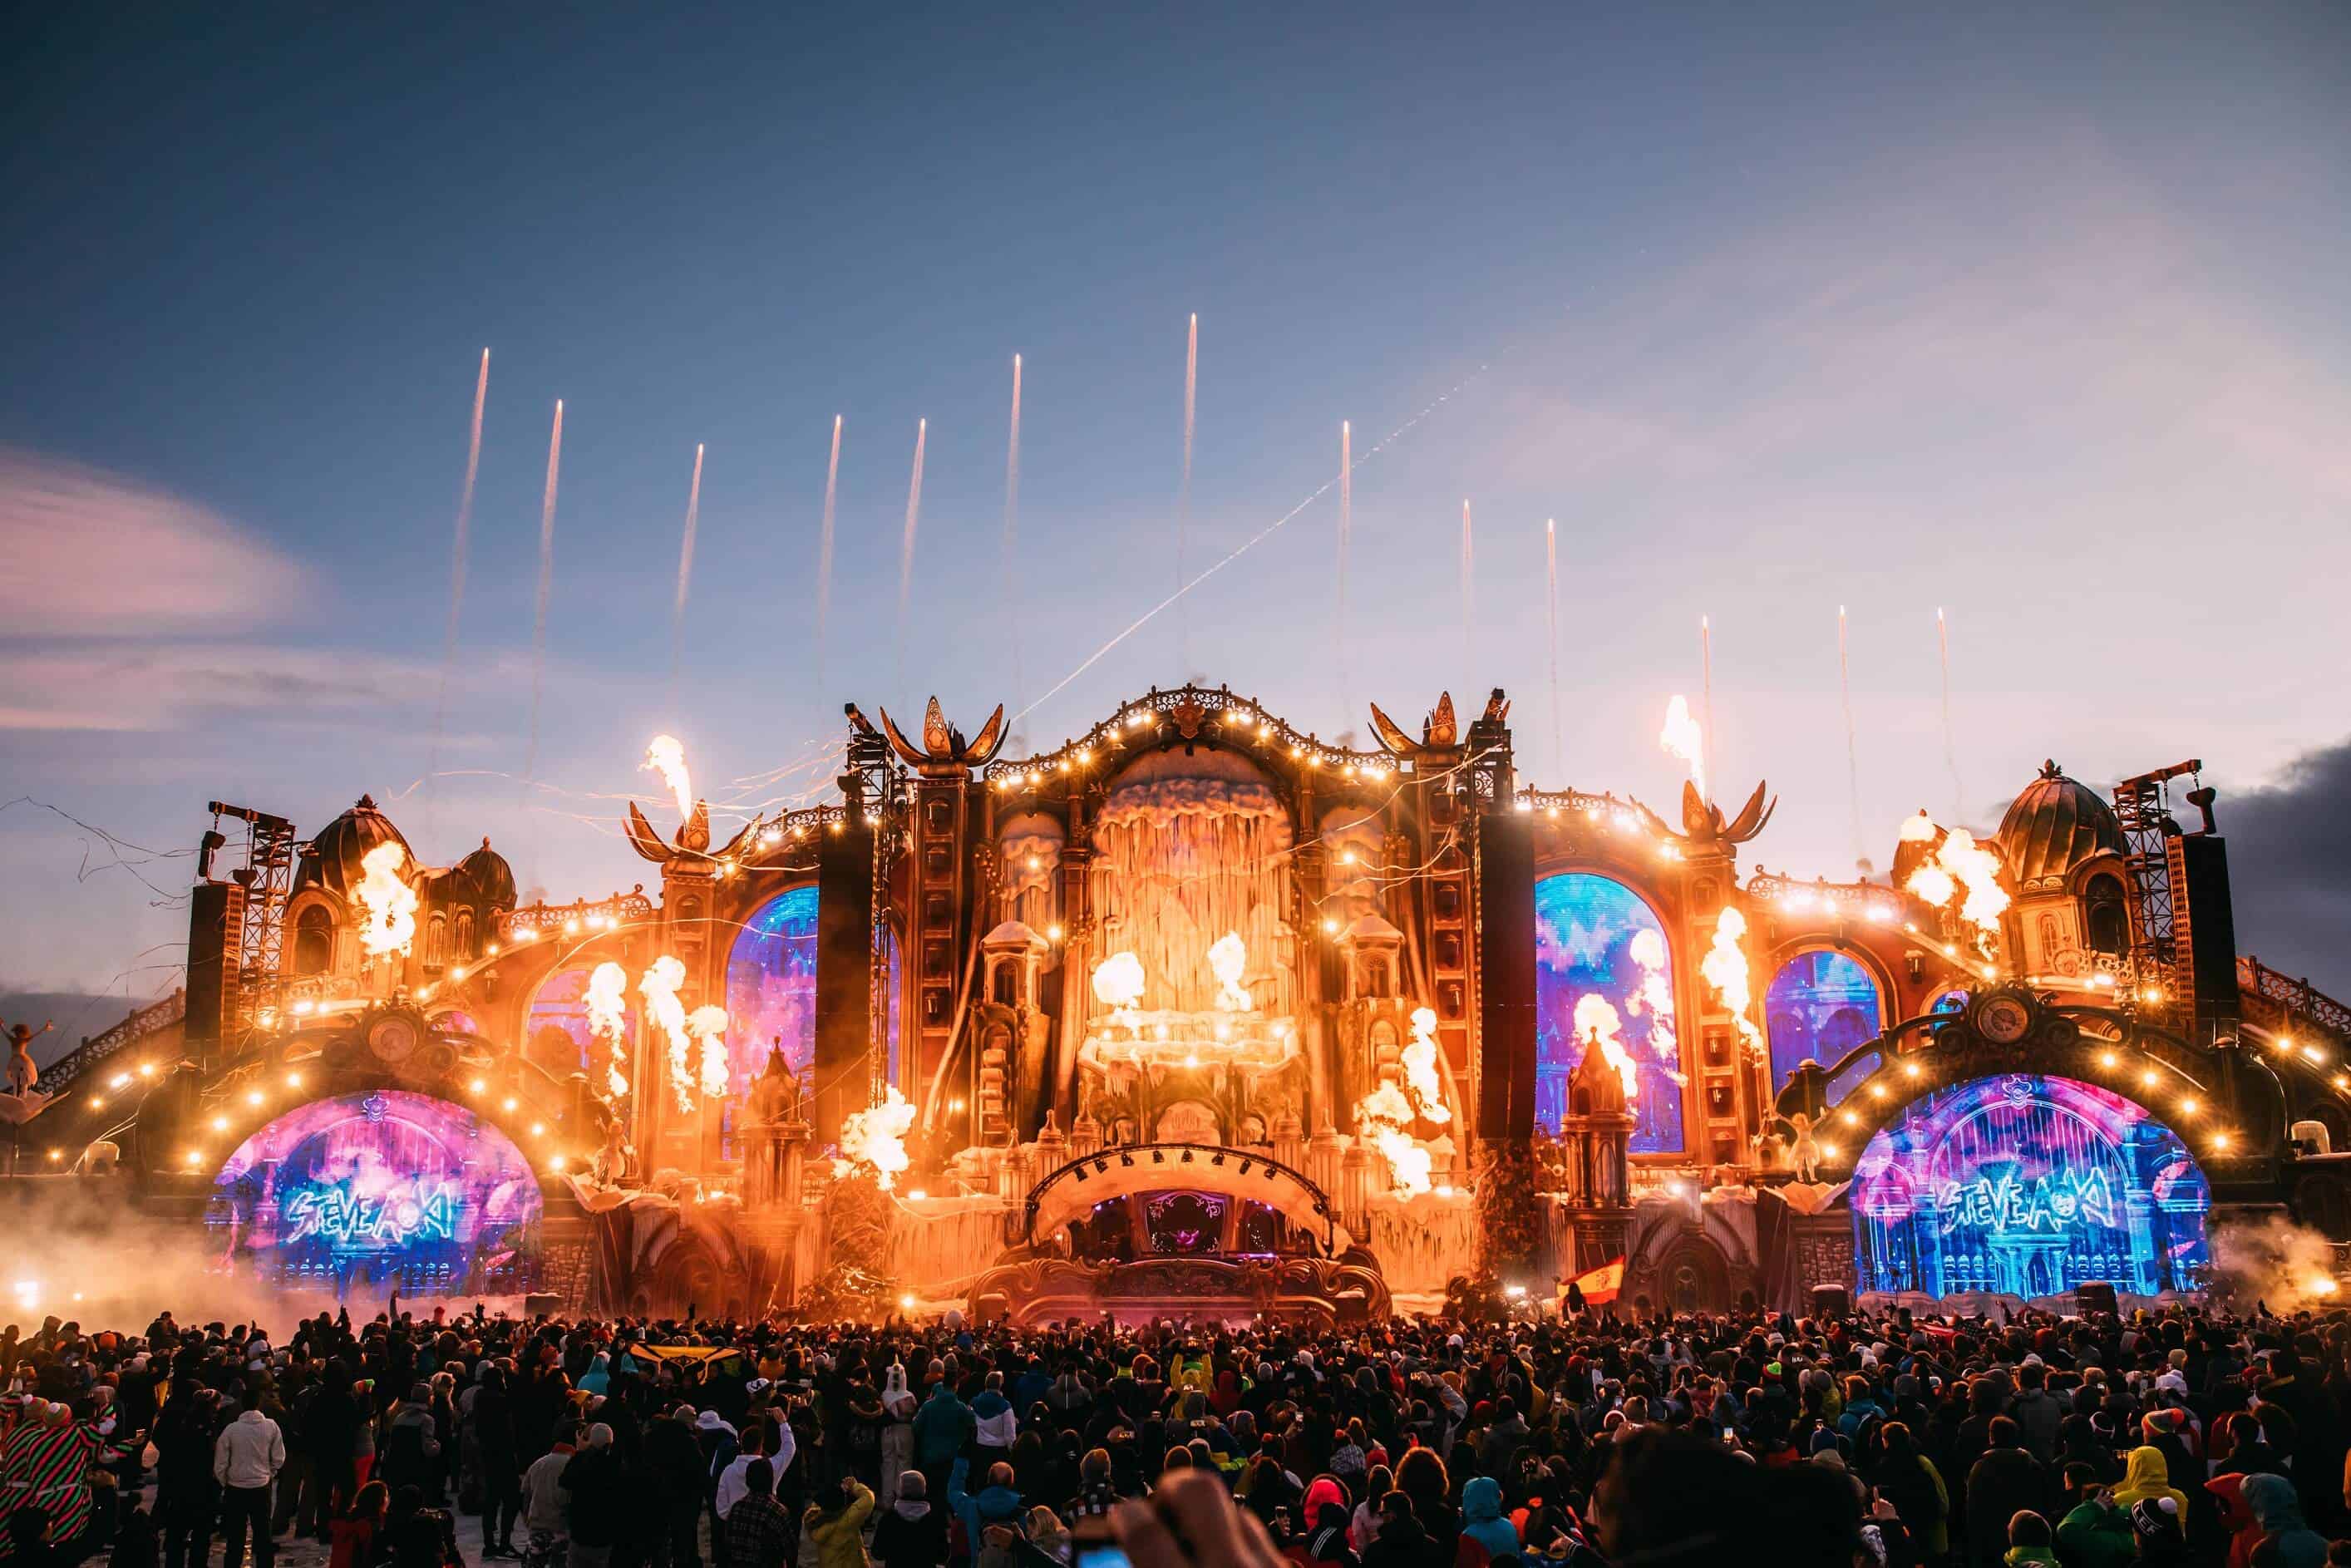 Tomorrowland to release NFT to coincide with festival